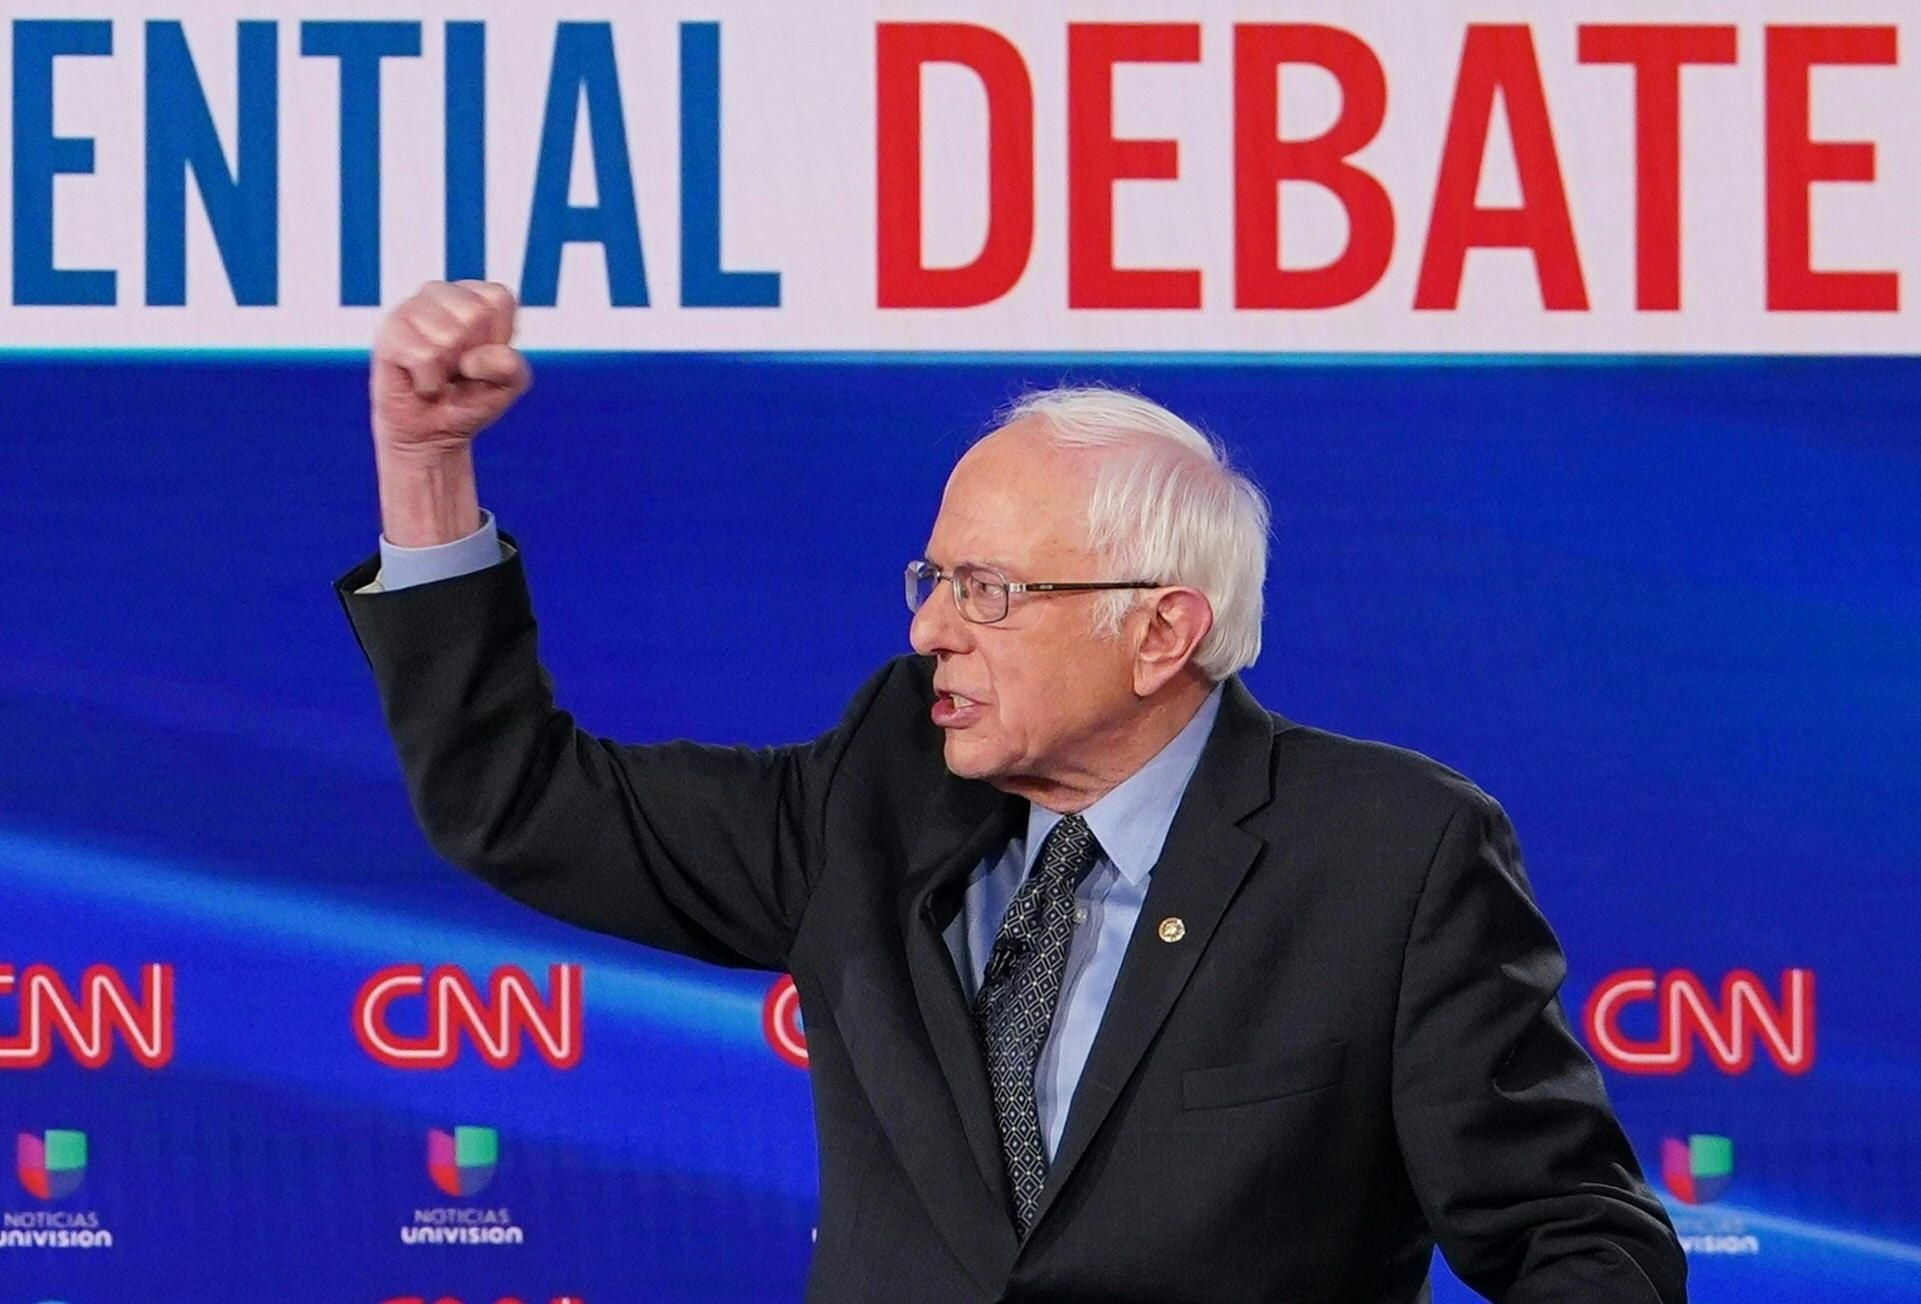 Sen. Bernie Sanders (I-Vt.), the a Democratic presidential primary candidate, participated in a debate in Washington, D.C. on March 15, 2020. (Photo by Mandel NganAFP via Getty Images)